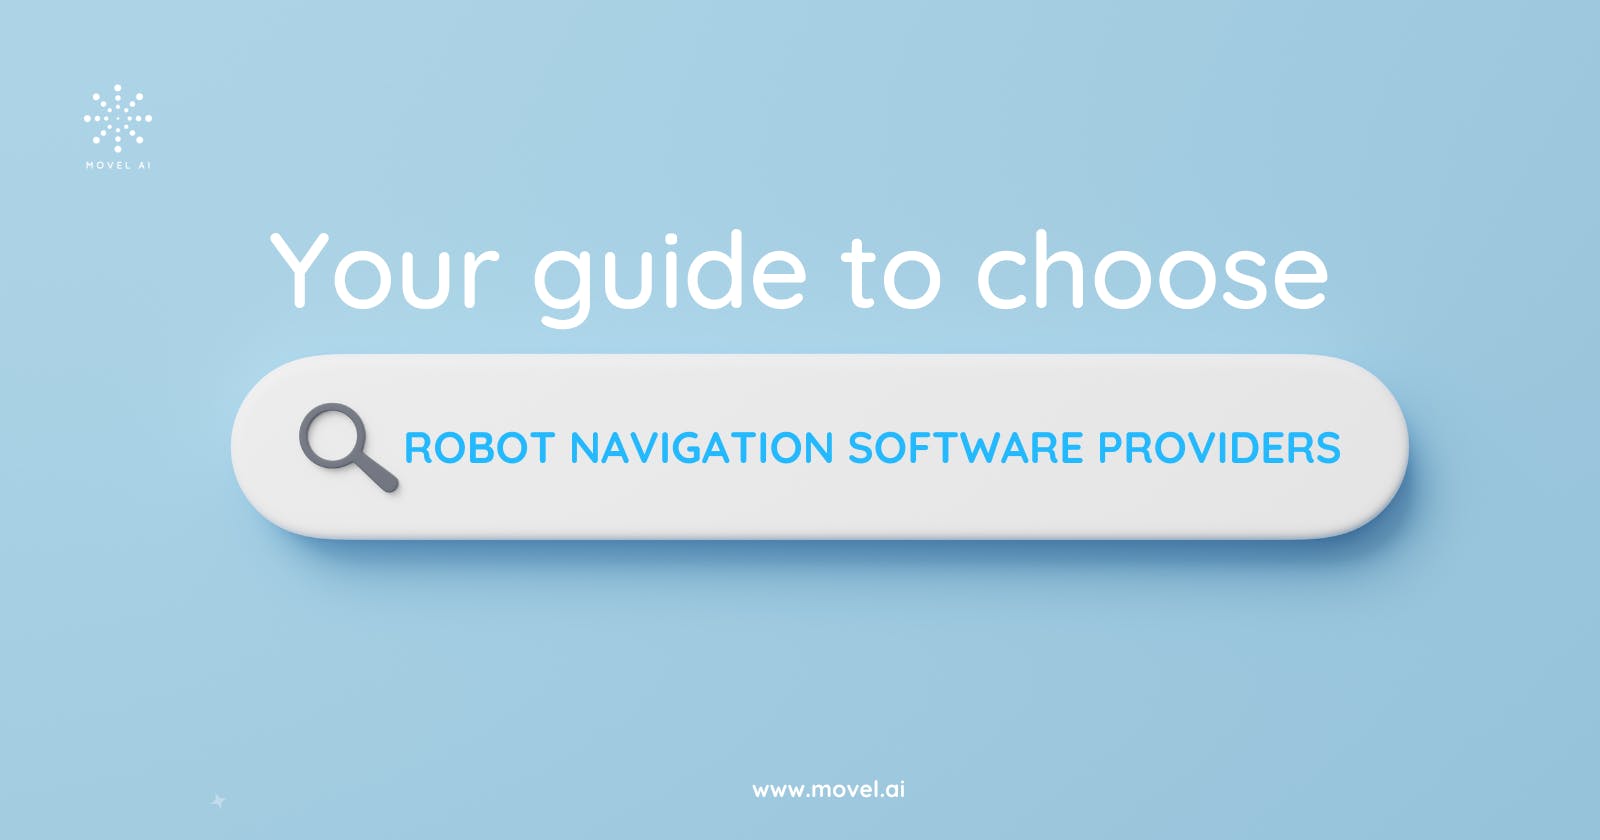 Your guide to choosing Robot Navigation software providers